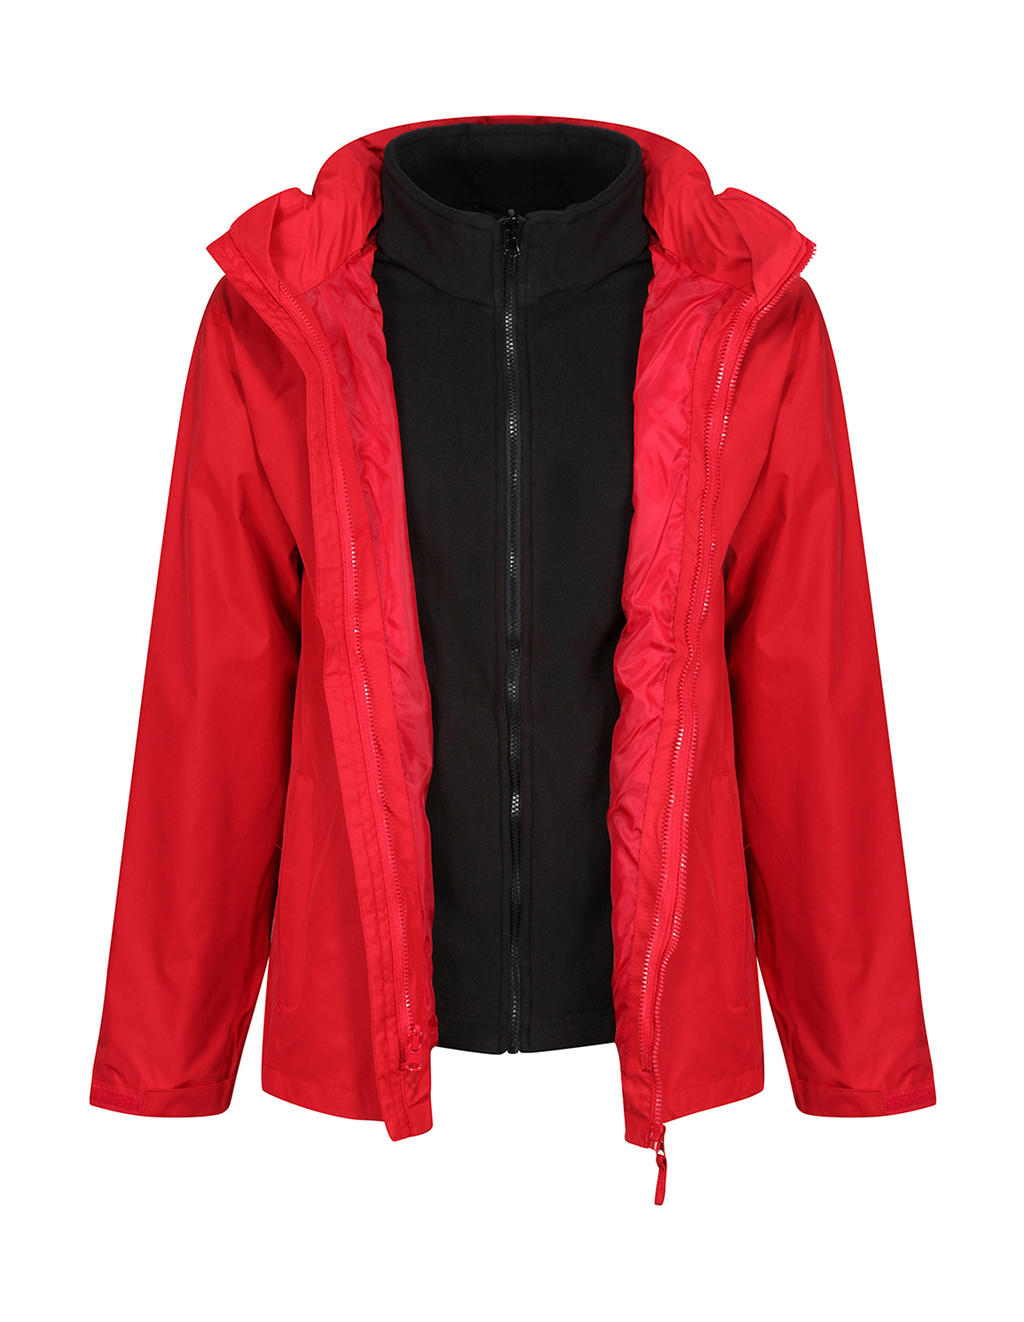  Classic 3-in-1 Jacket in Farbe Classic Red